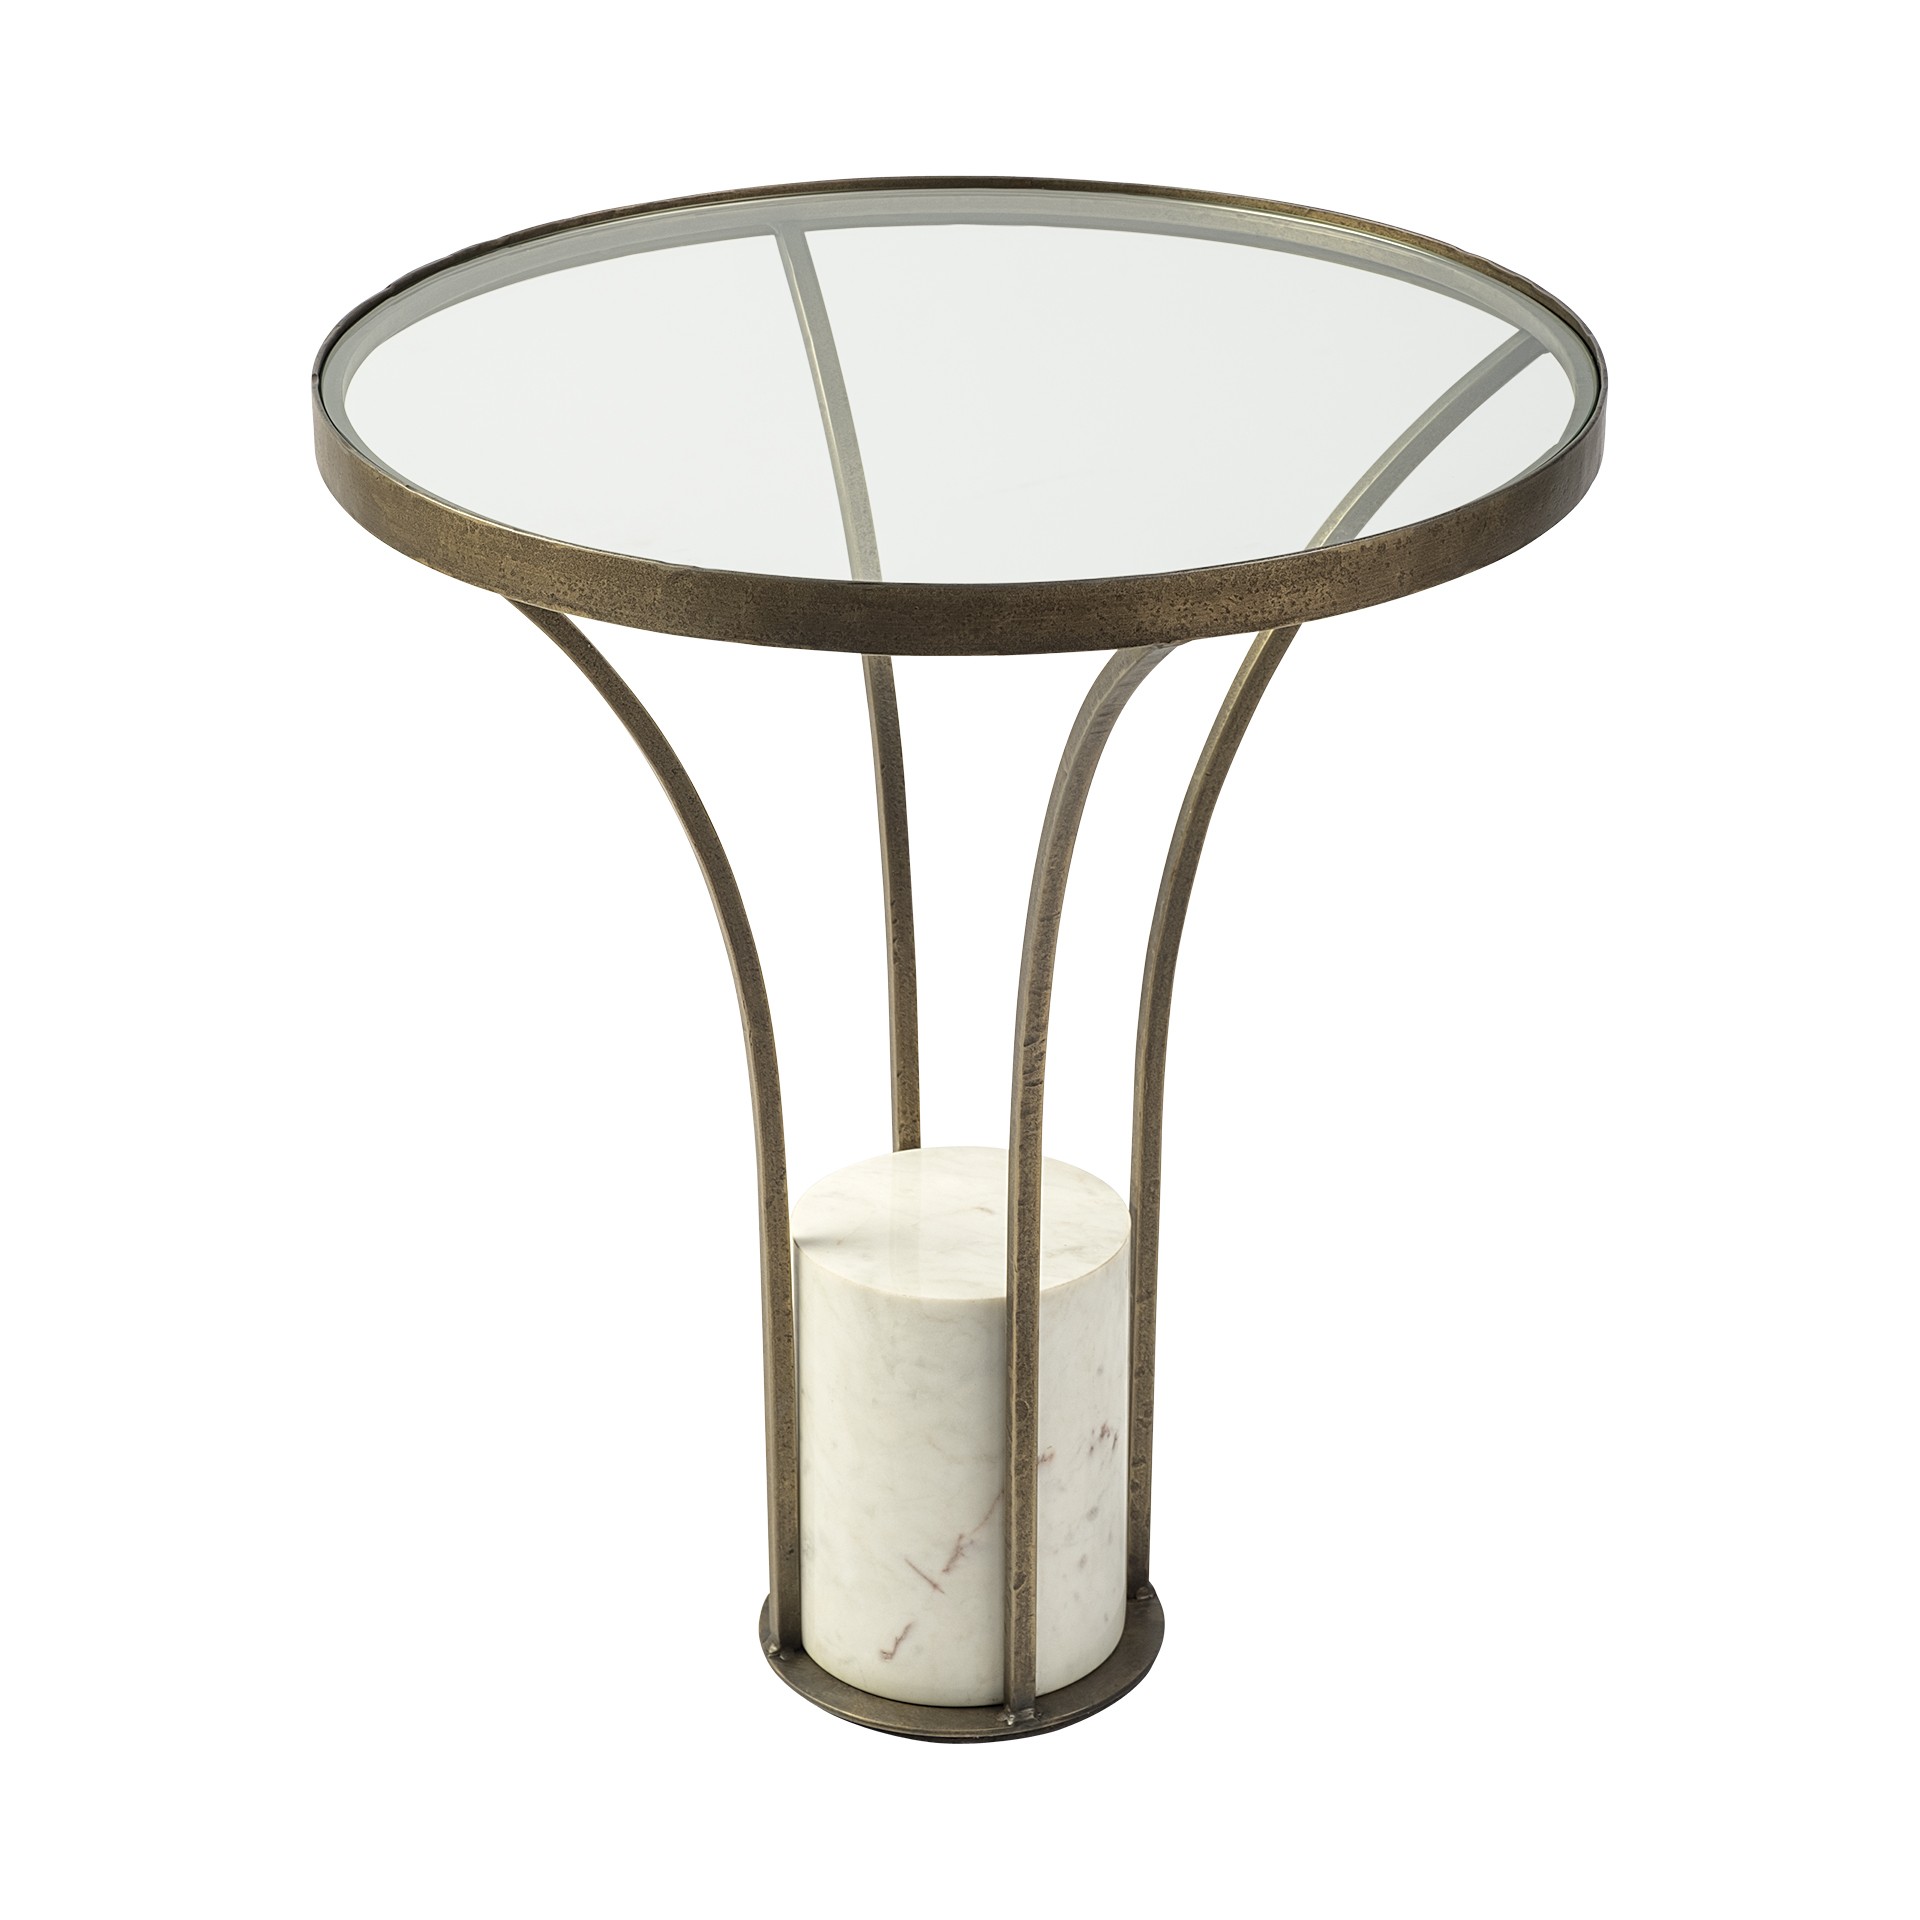 21" Round Glass Top End Table with Metal and Marble Pedestal